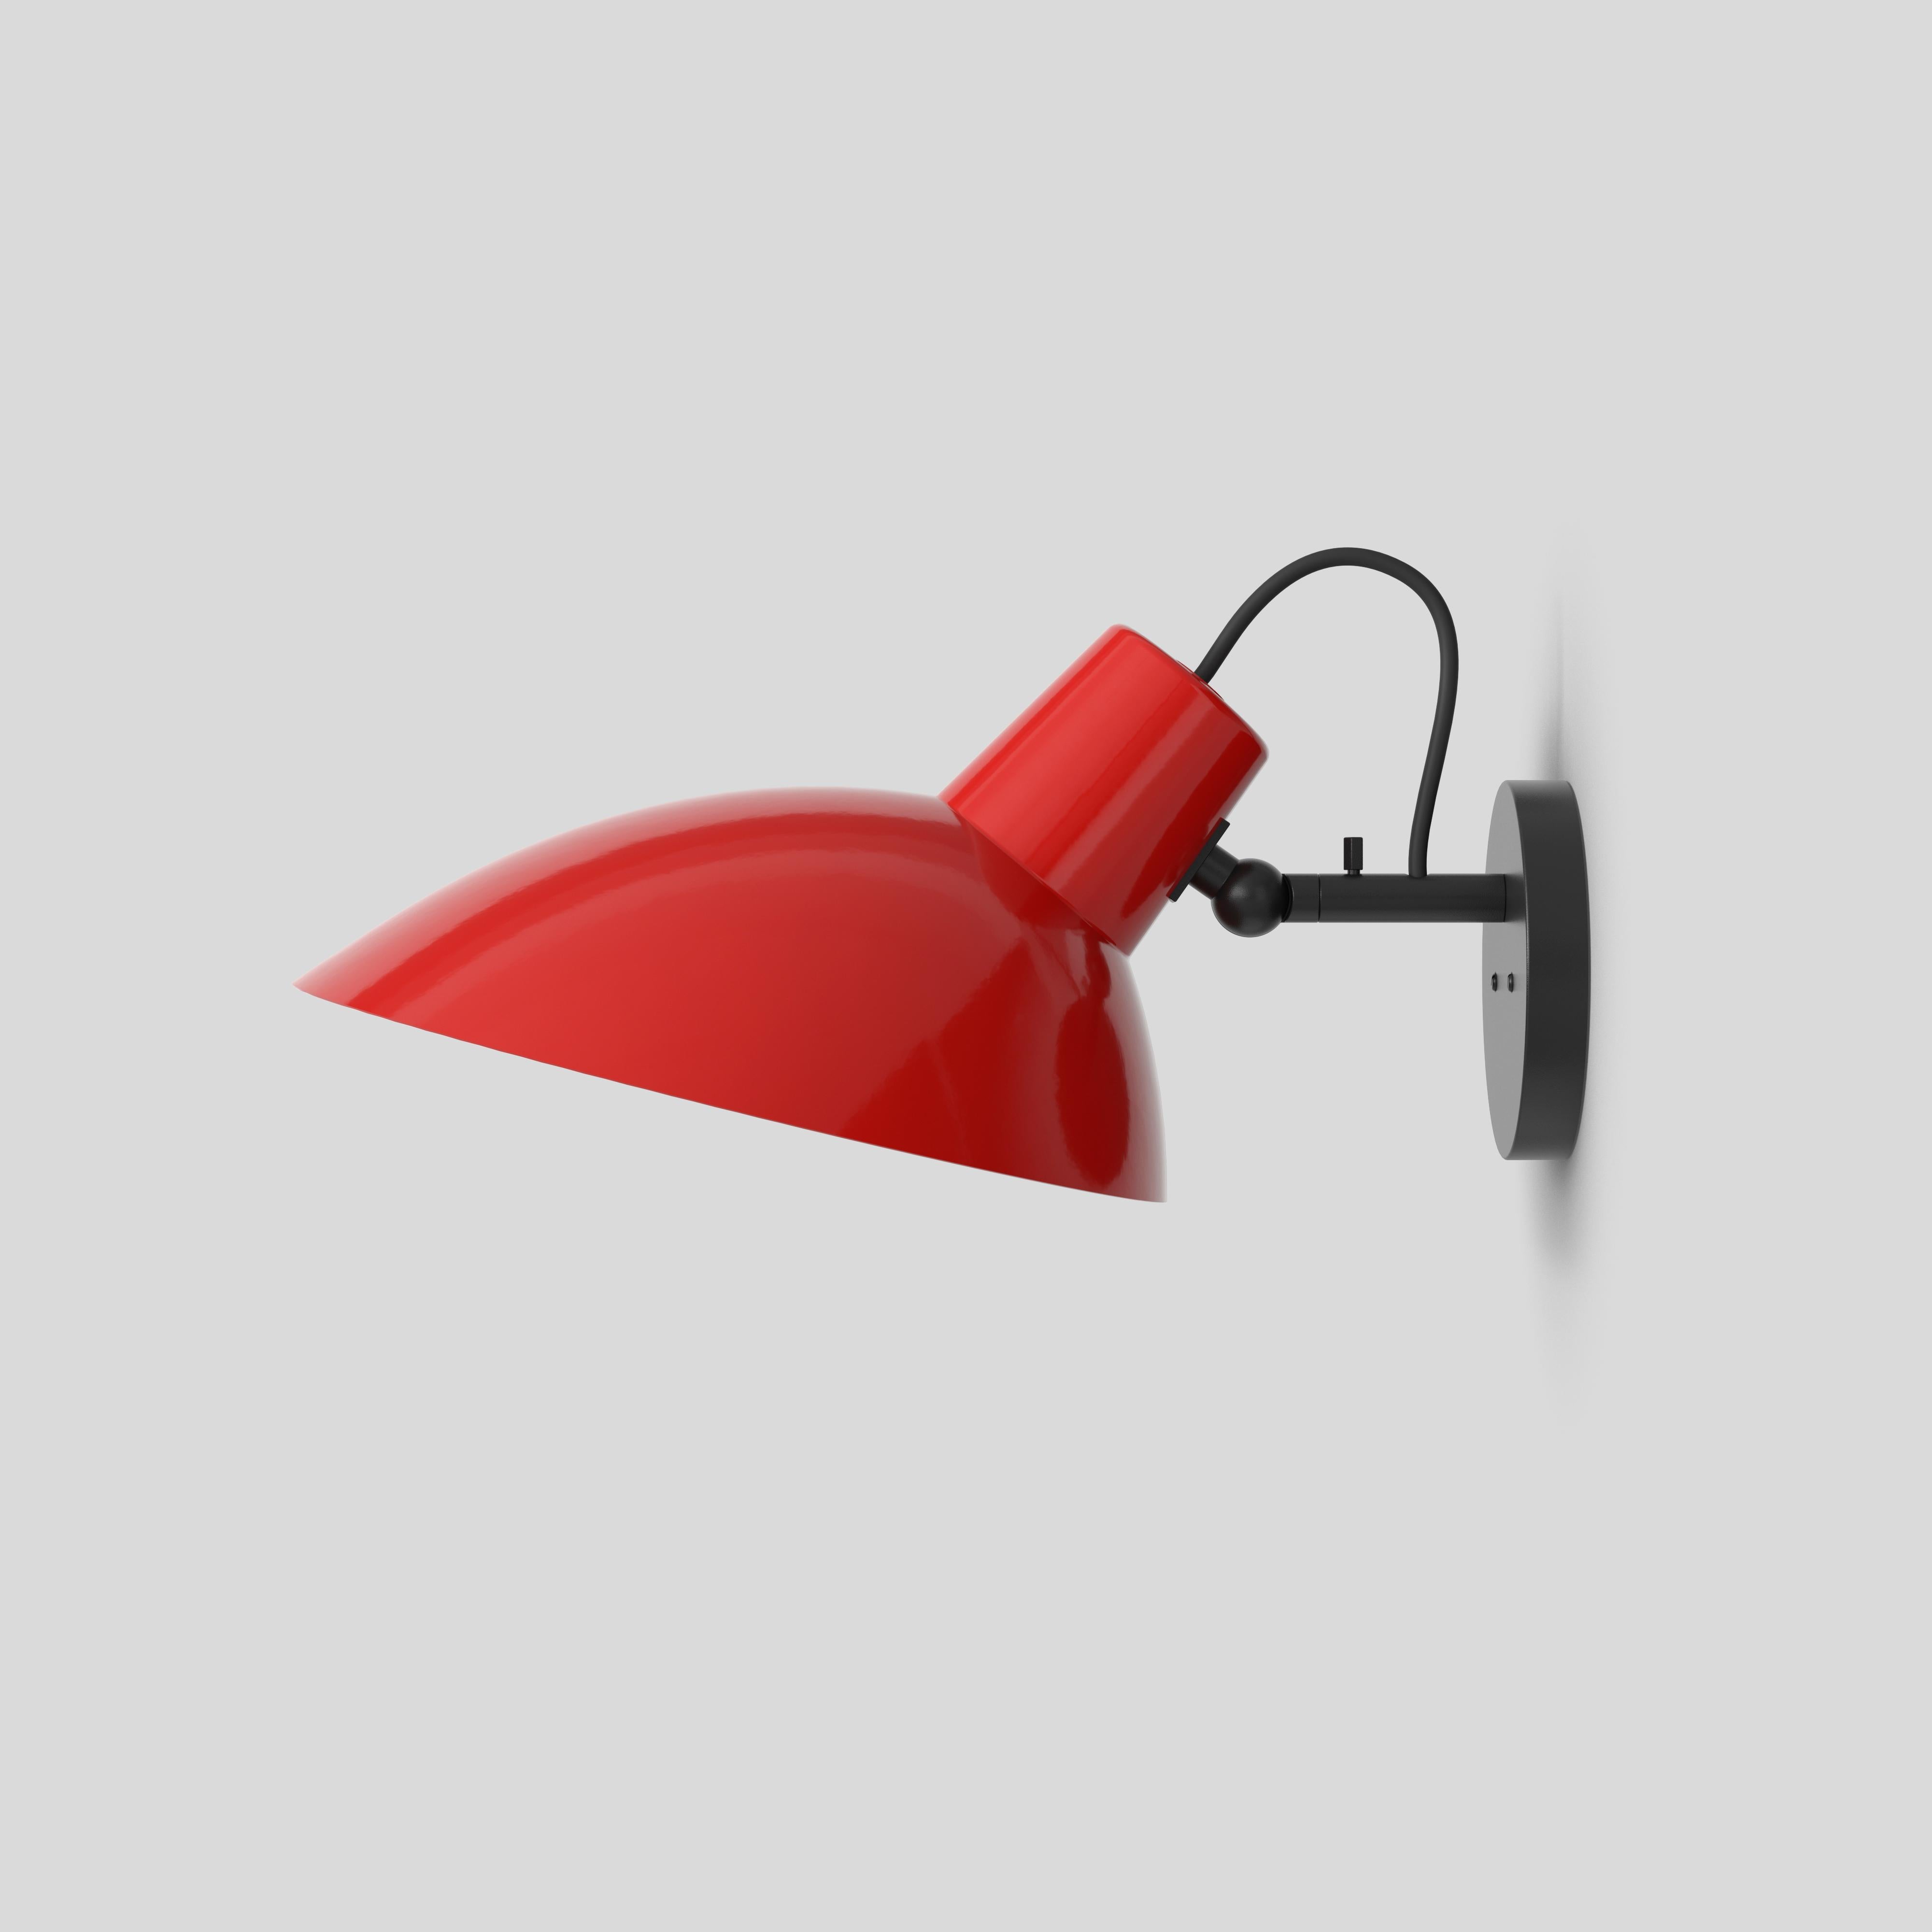 VV Cinquanta wall lamp
Design by Vittoriano Viganò
This version is with red lacquered reflector and black mount.

The VV Cinquanta features an elegant and versatile posable direct light source that can swivel and tilt. The Wall model is mounted